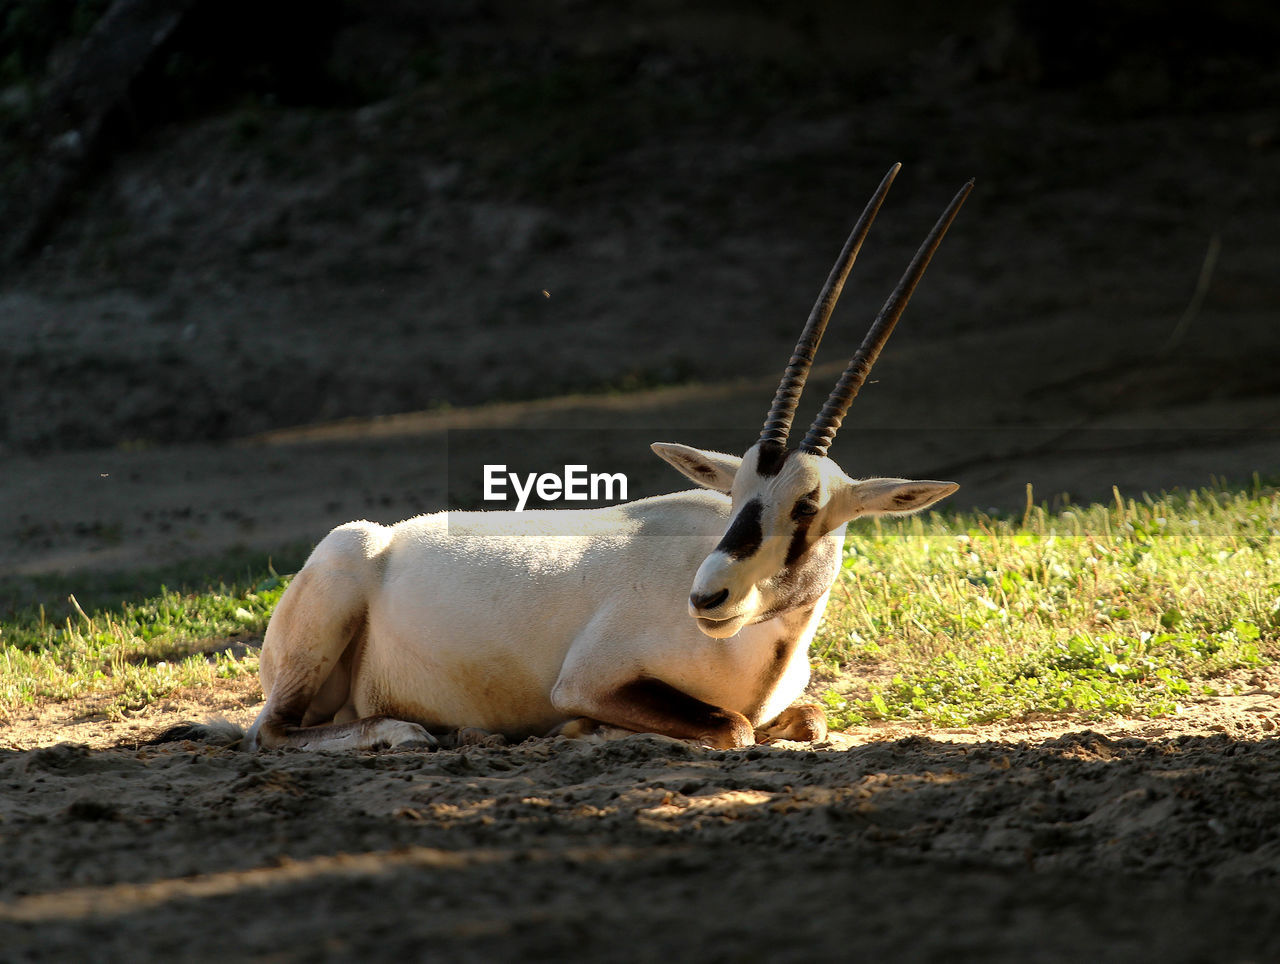 Addax  nasomaculotus, the addax antelope,  in  a zoo 